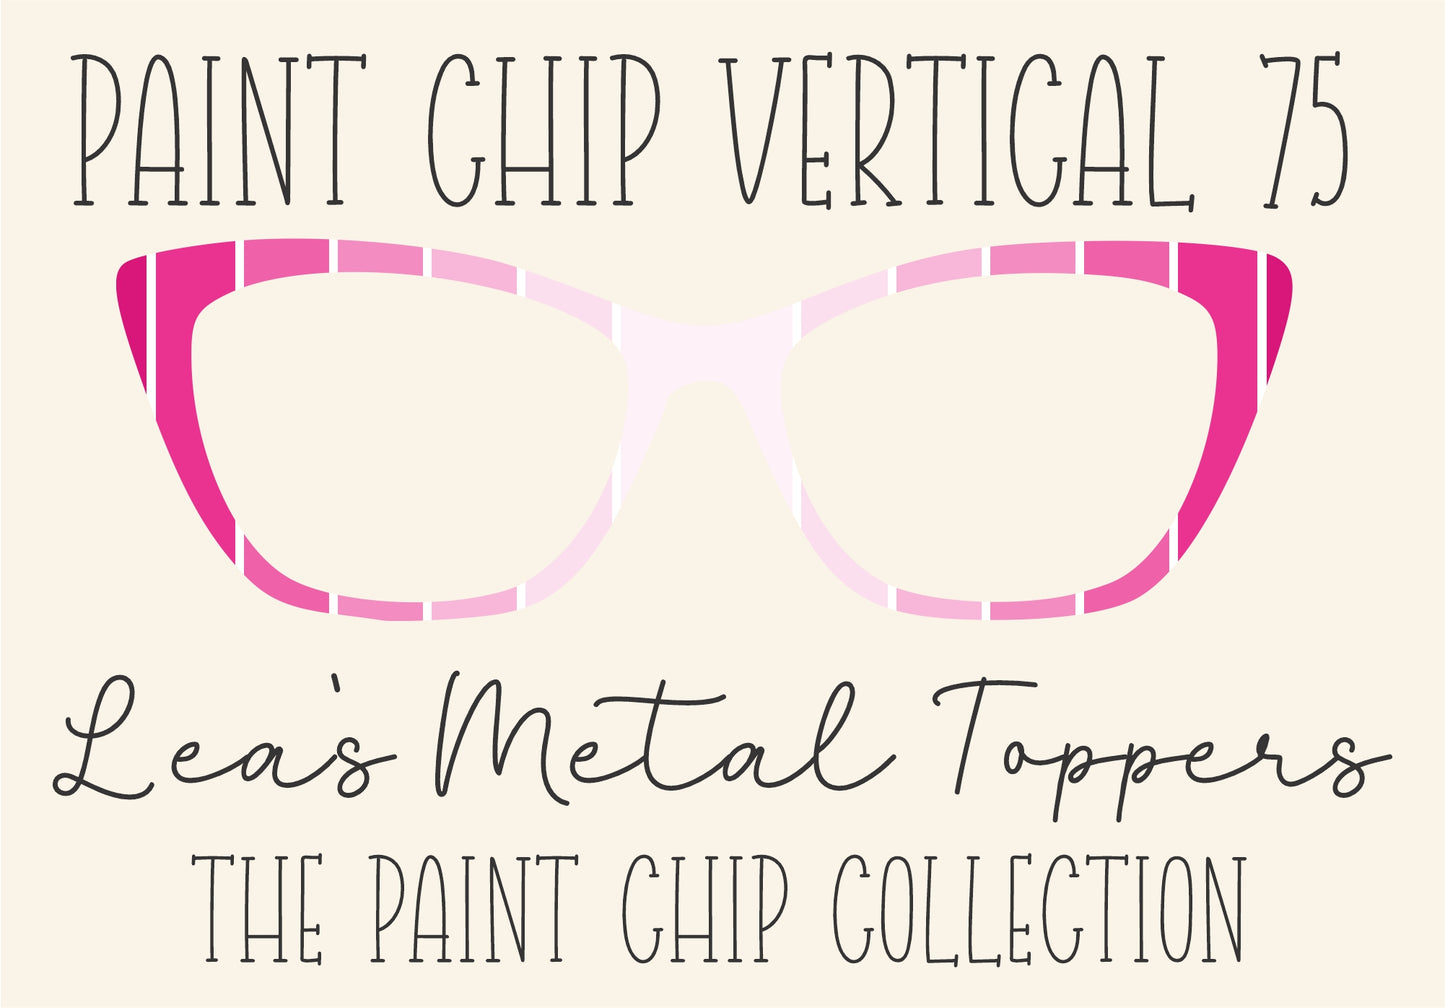 PAINT CHIP VERTICAL 75 Eyewear Frame Toppers COMES WITH MAGNETS